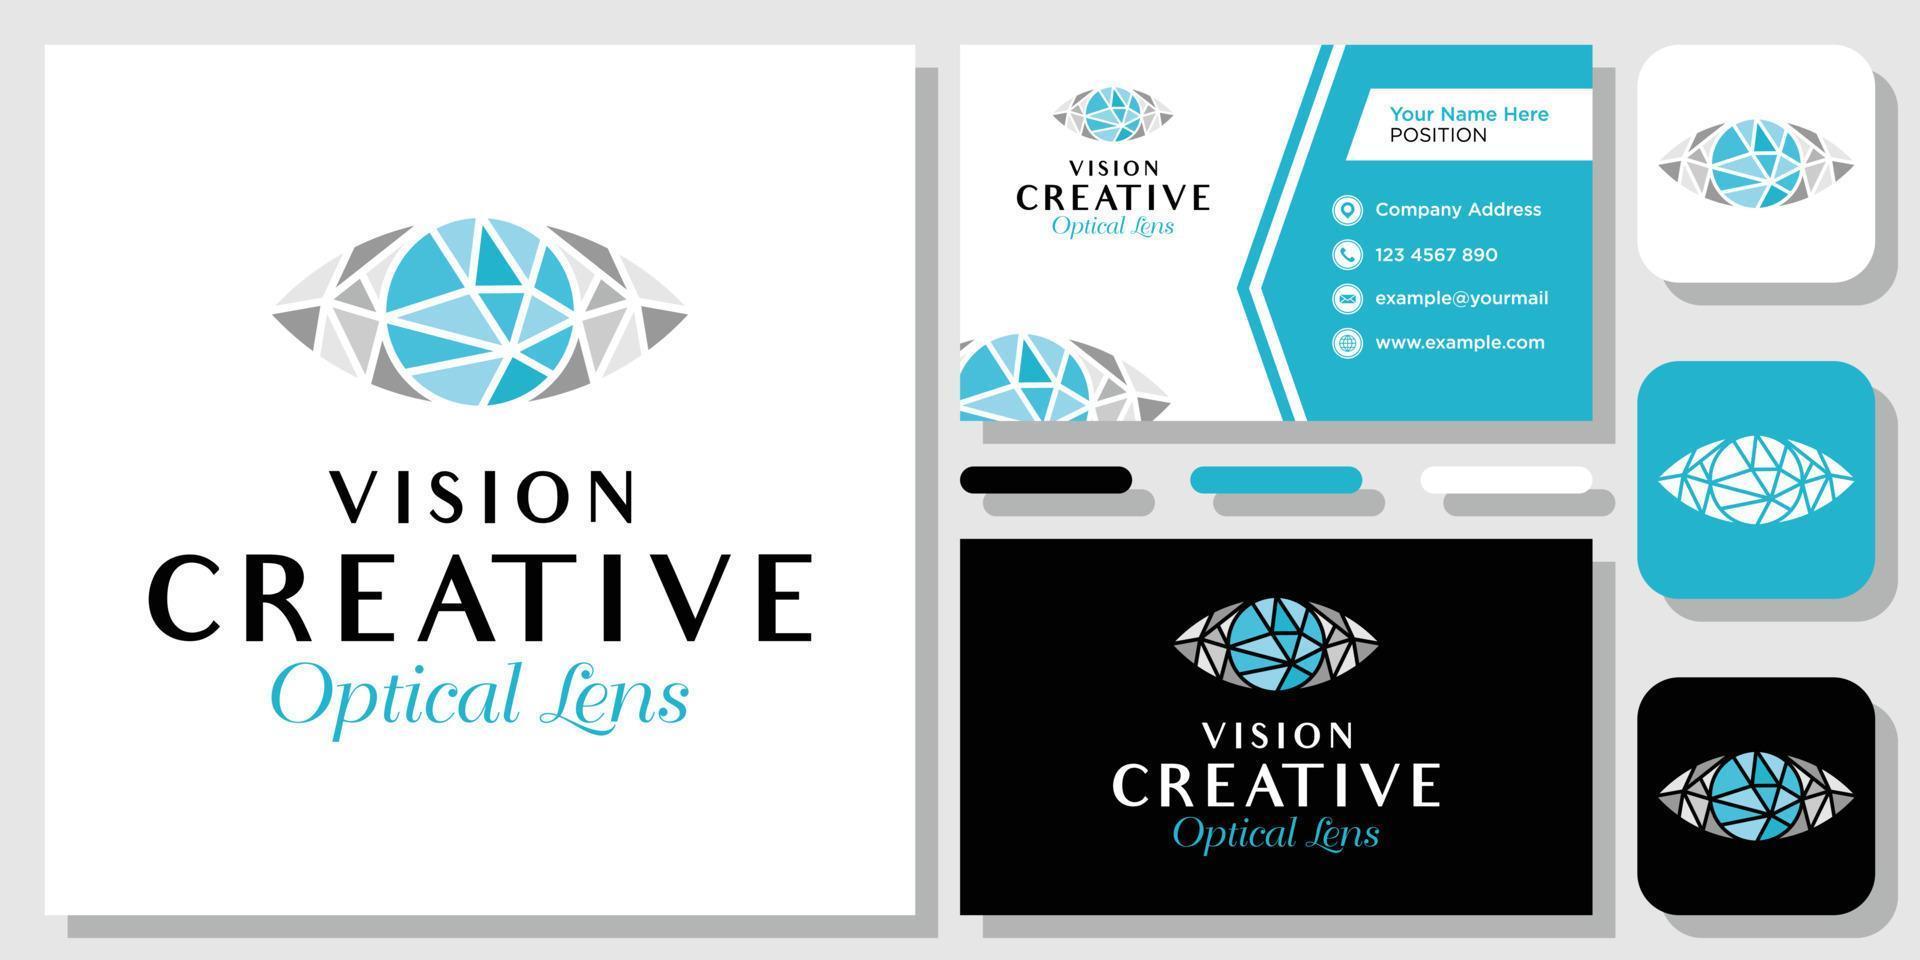 Eye Diamond Vision Luxury Premium Fashion Optical Lens logo design inspiration with Layout Template Business Card vector